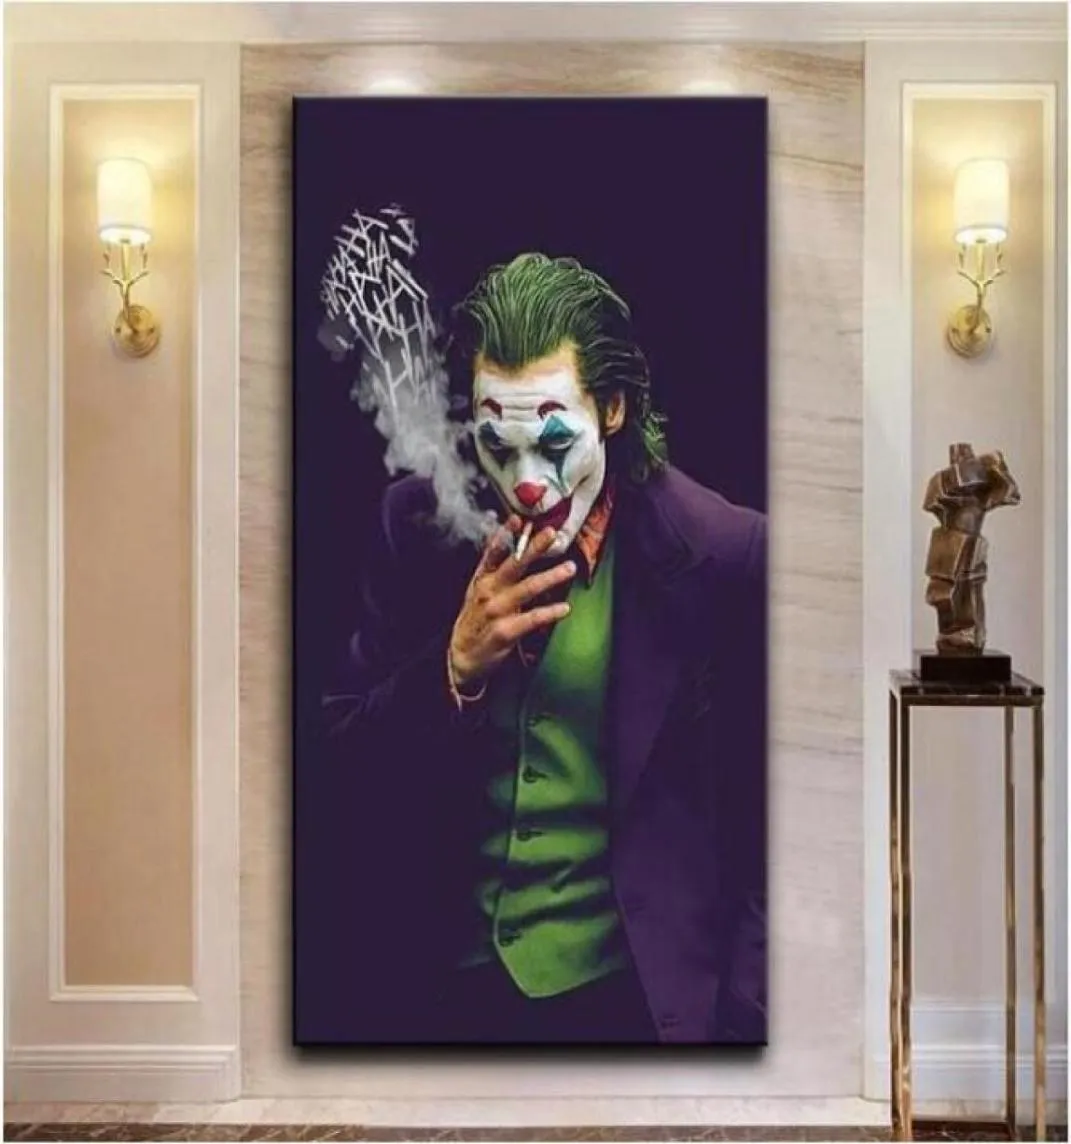 The Joker Wall Art Canvas Painting Wall Prints Pictures Chaplin Joker Movie Poster for Home Decor Modern Nordic Style Painting7634457